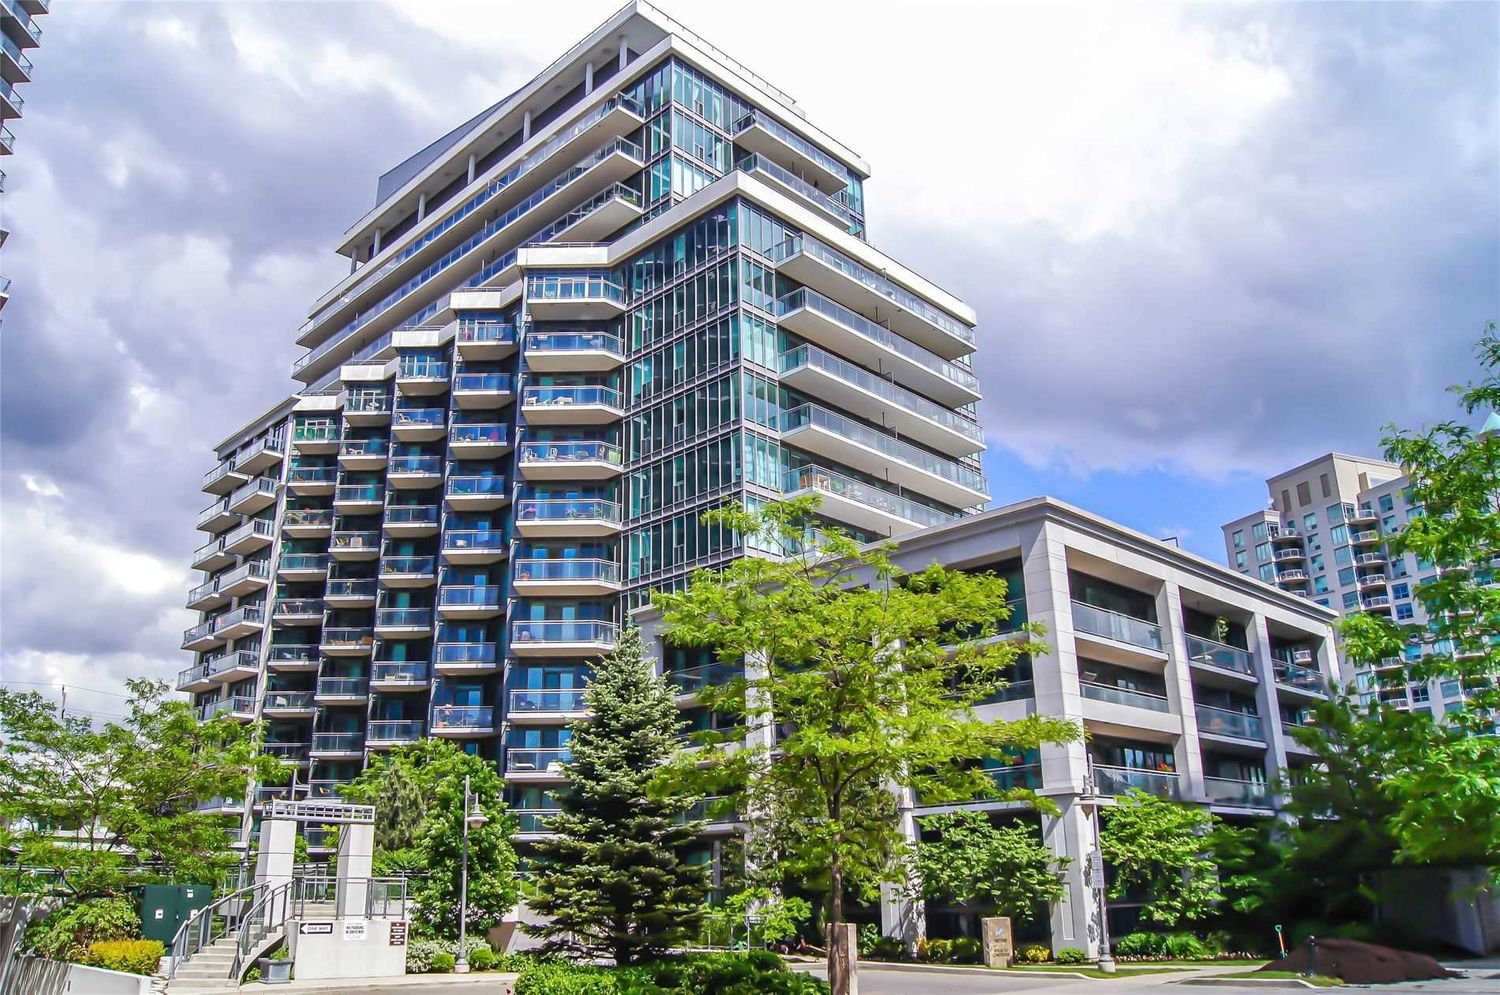 2119 Lake Shore Boulevard W. Voyager II at Waterview Condos is located in  Etobicoke, Toronto - image #1 of 2